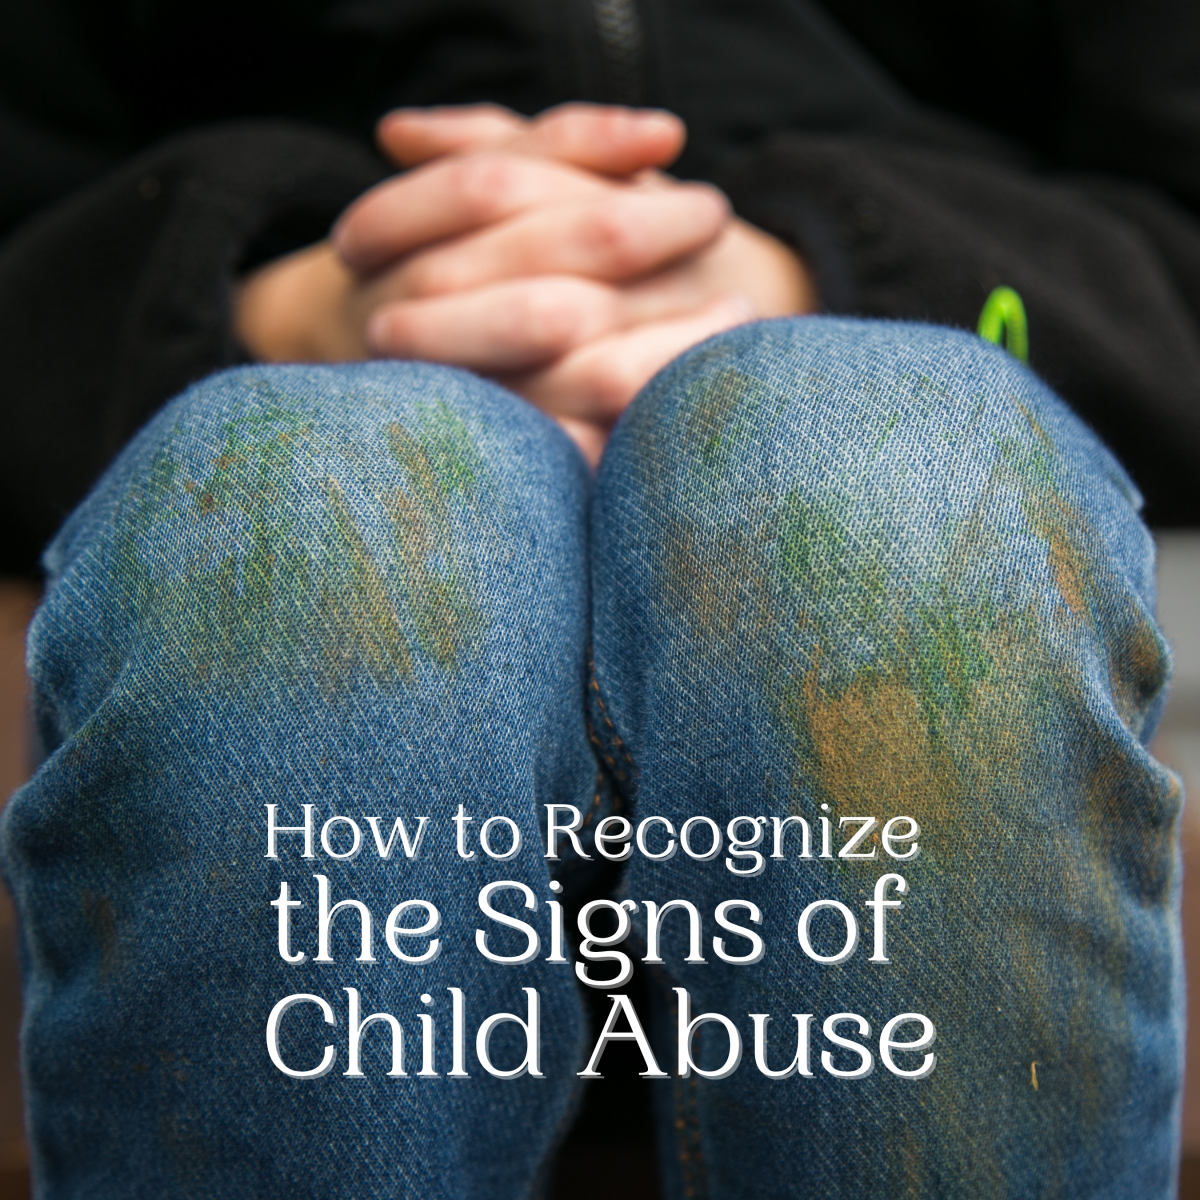 How to Recognize the Signs of Child Abuse